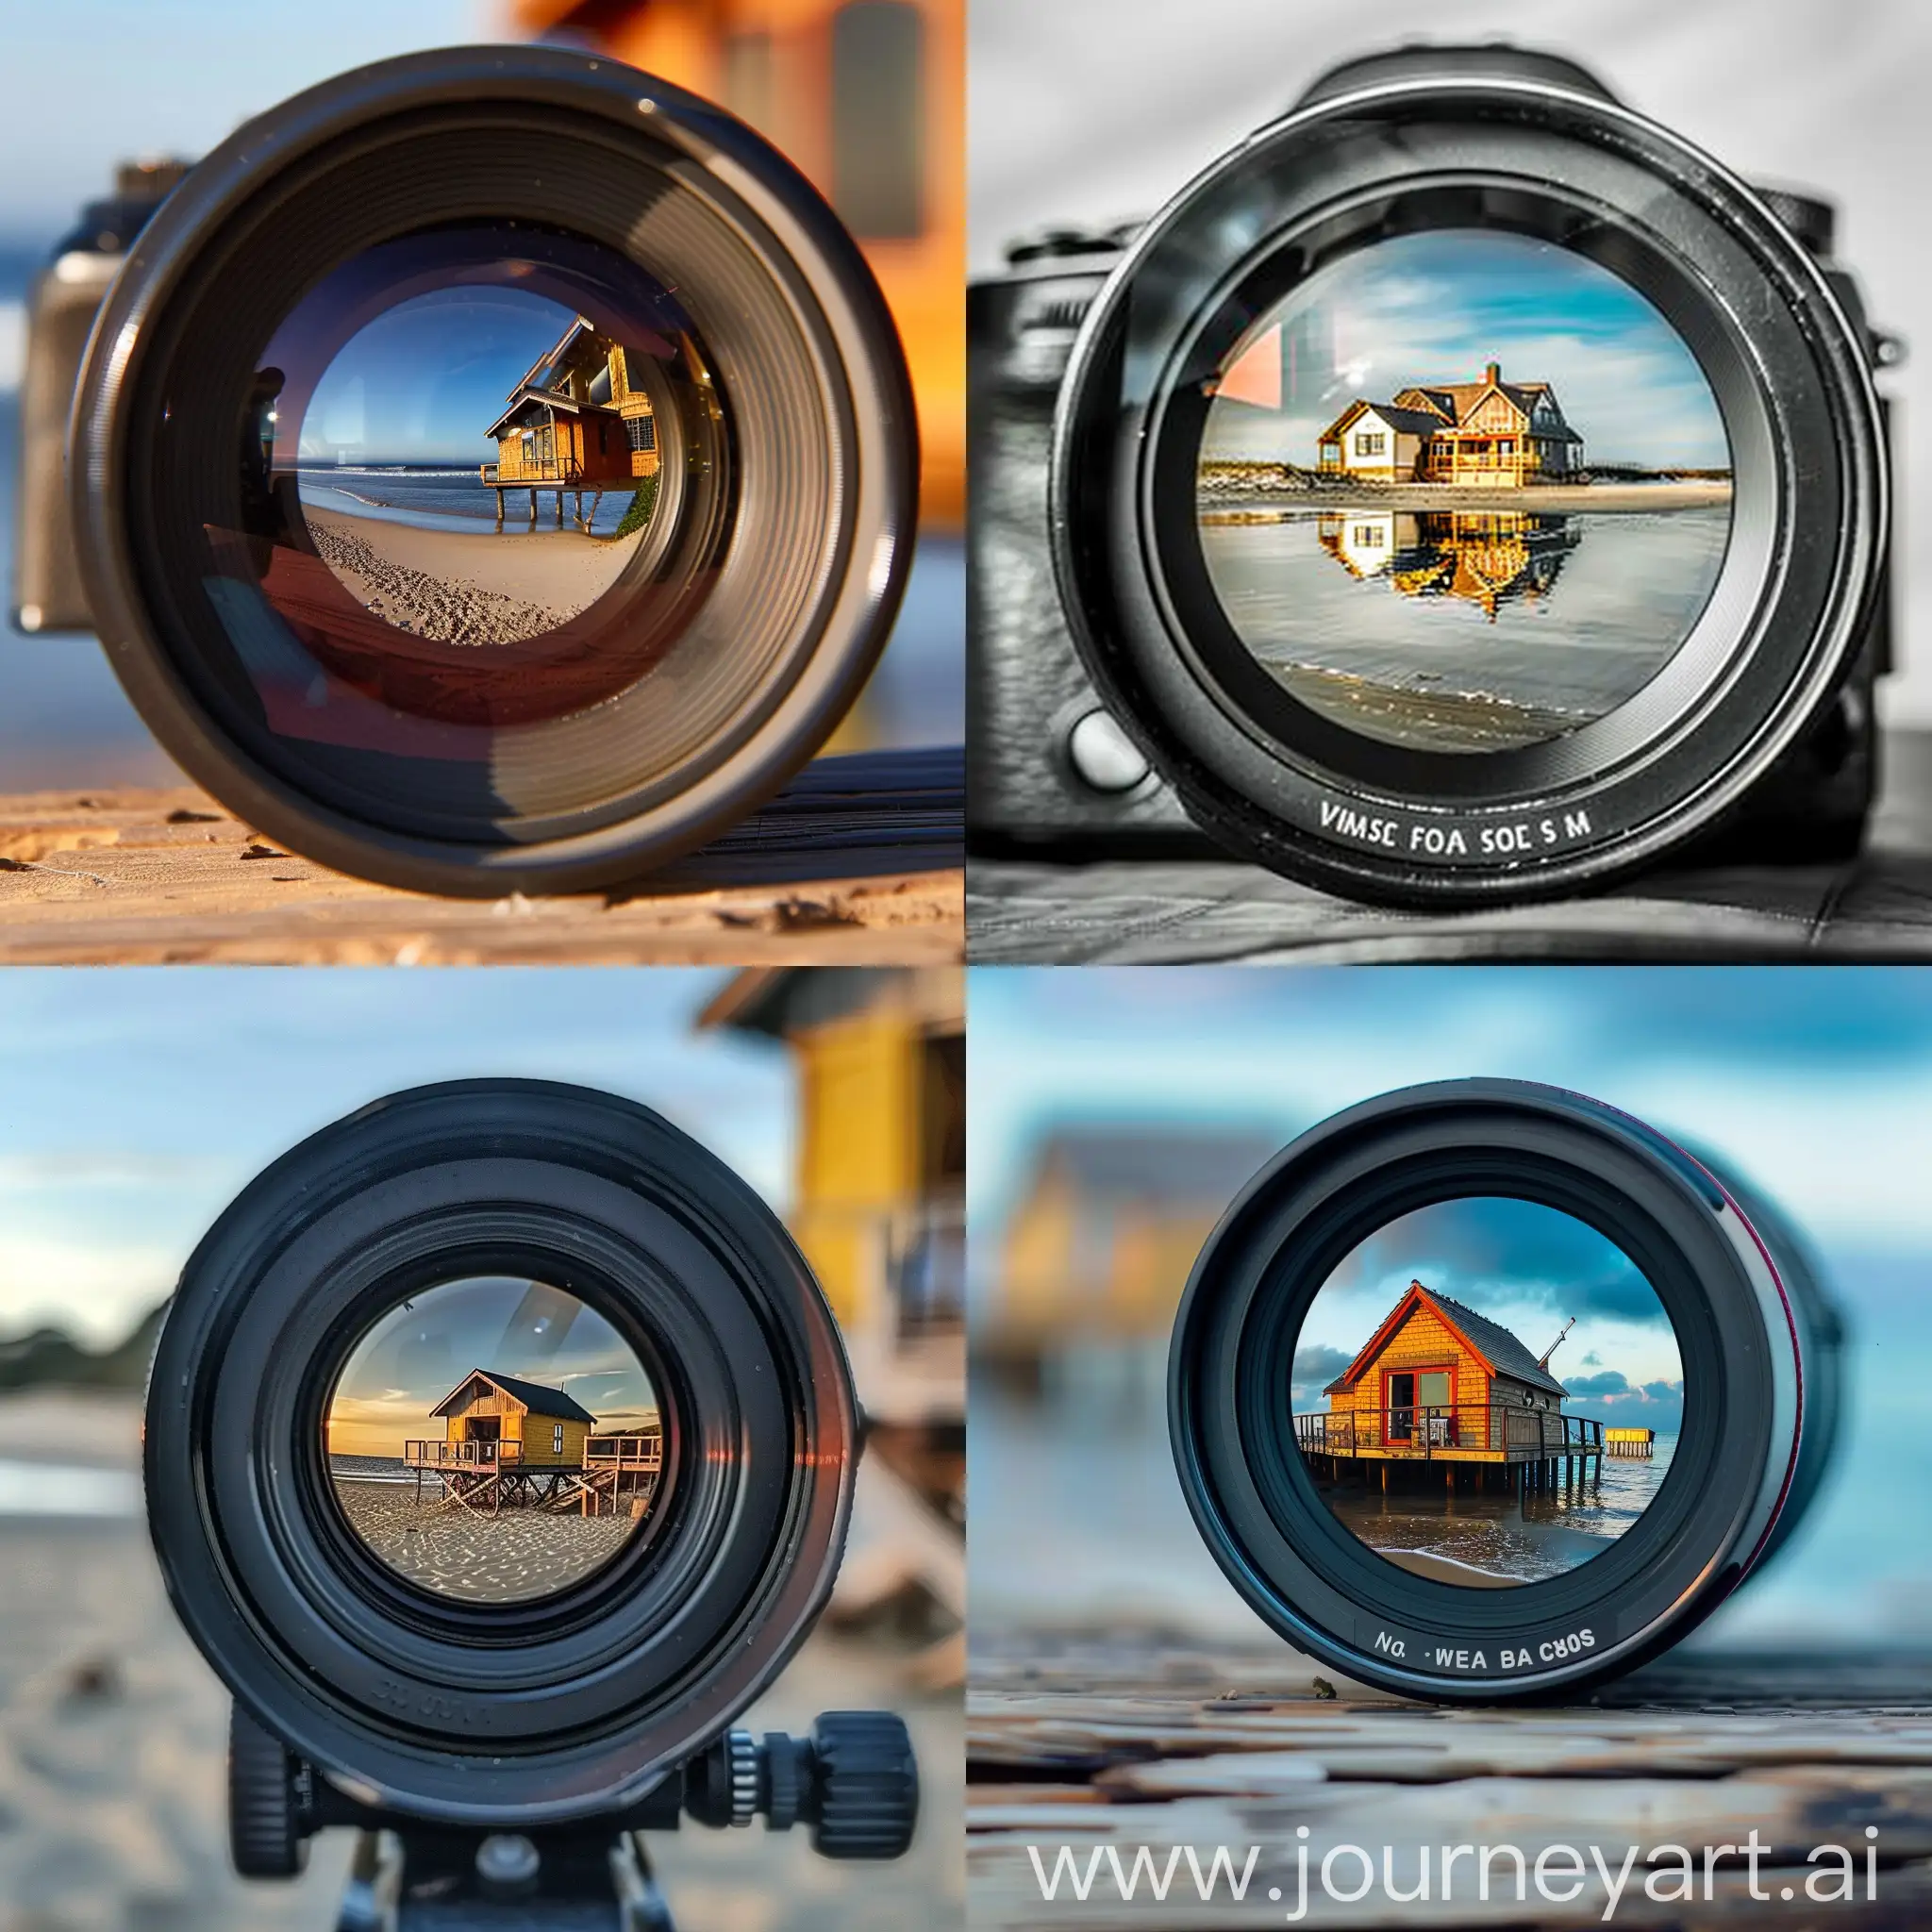 Beach-House-Reflection-in-Camera-Lens